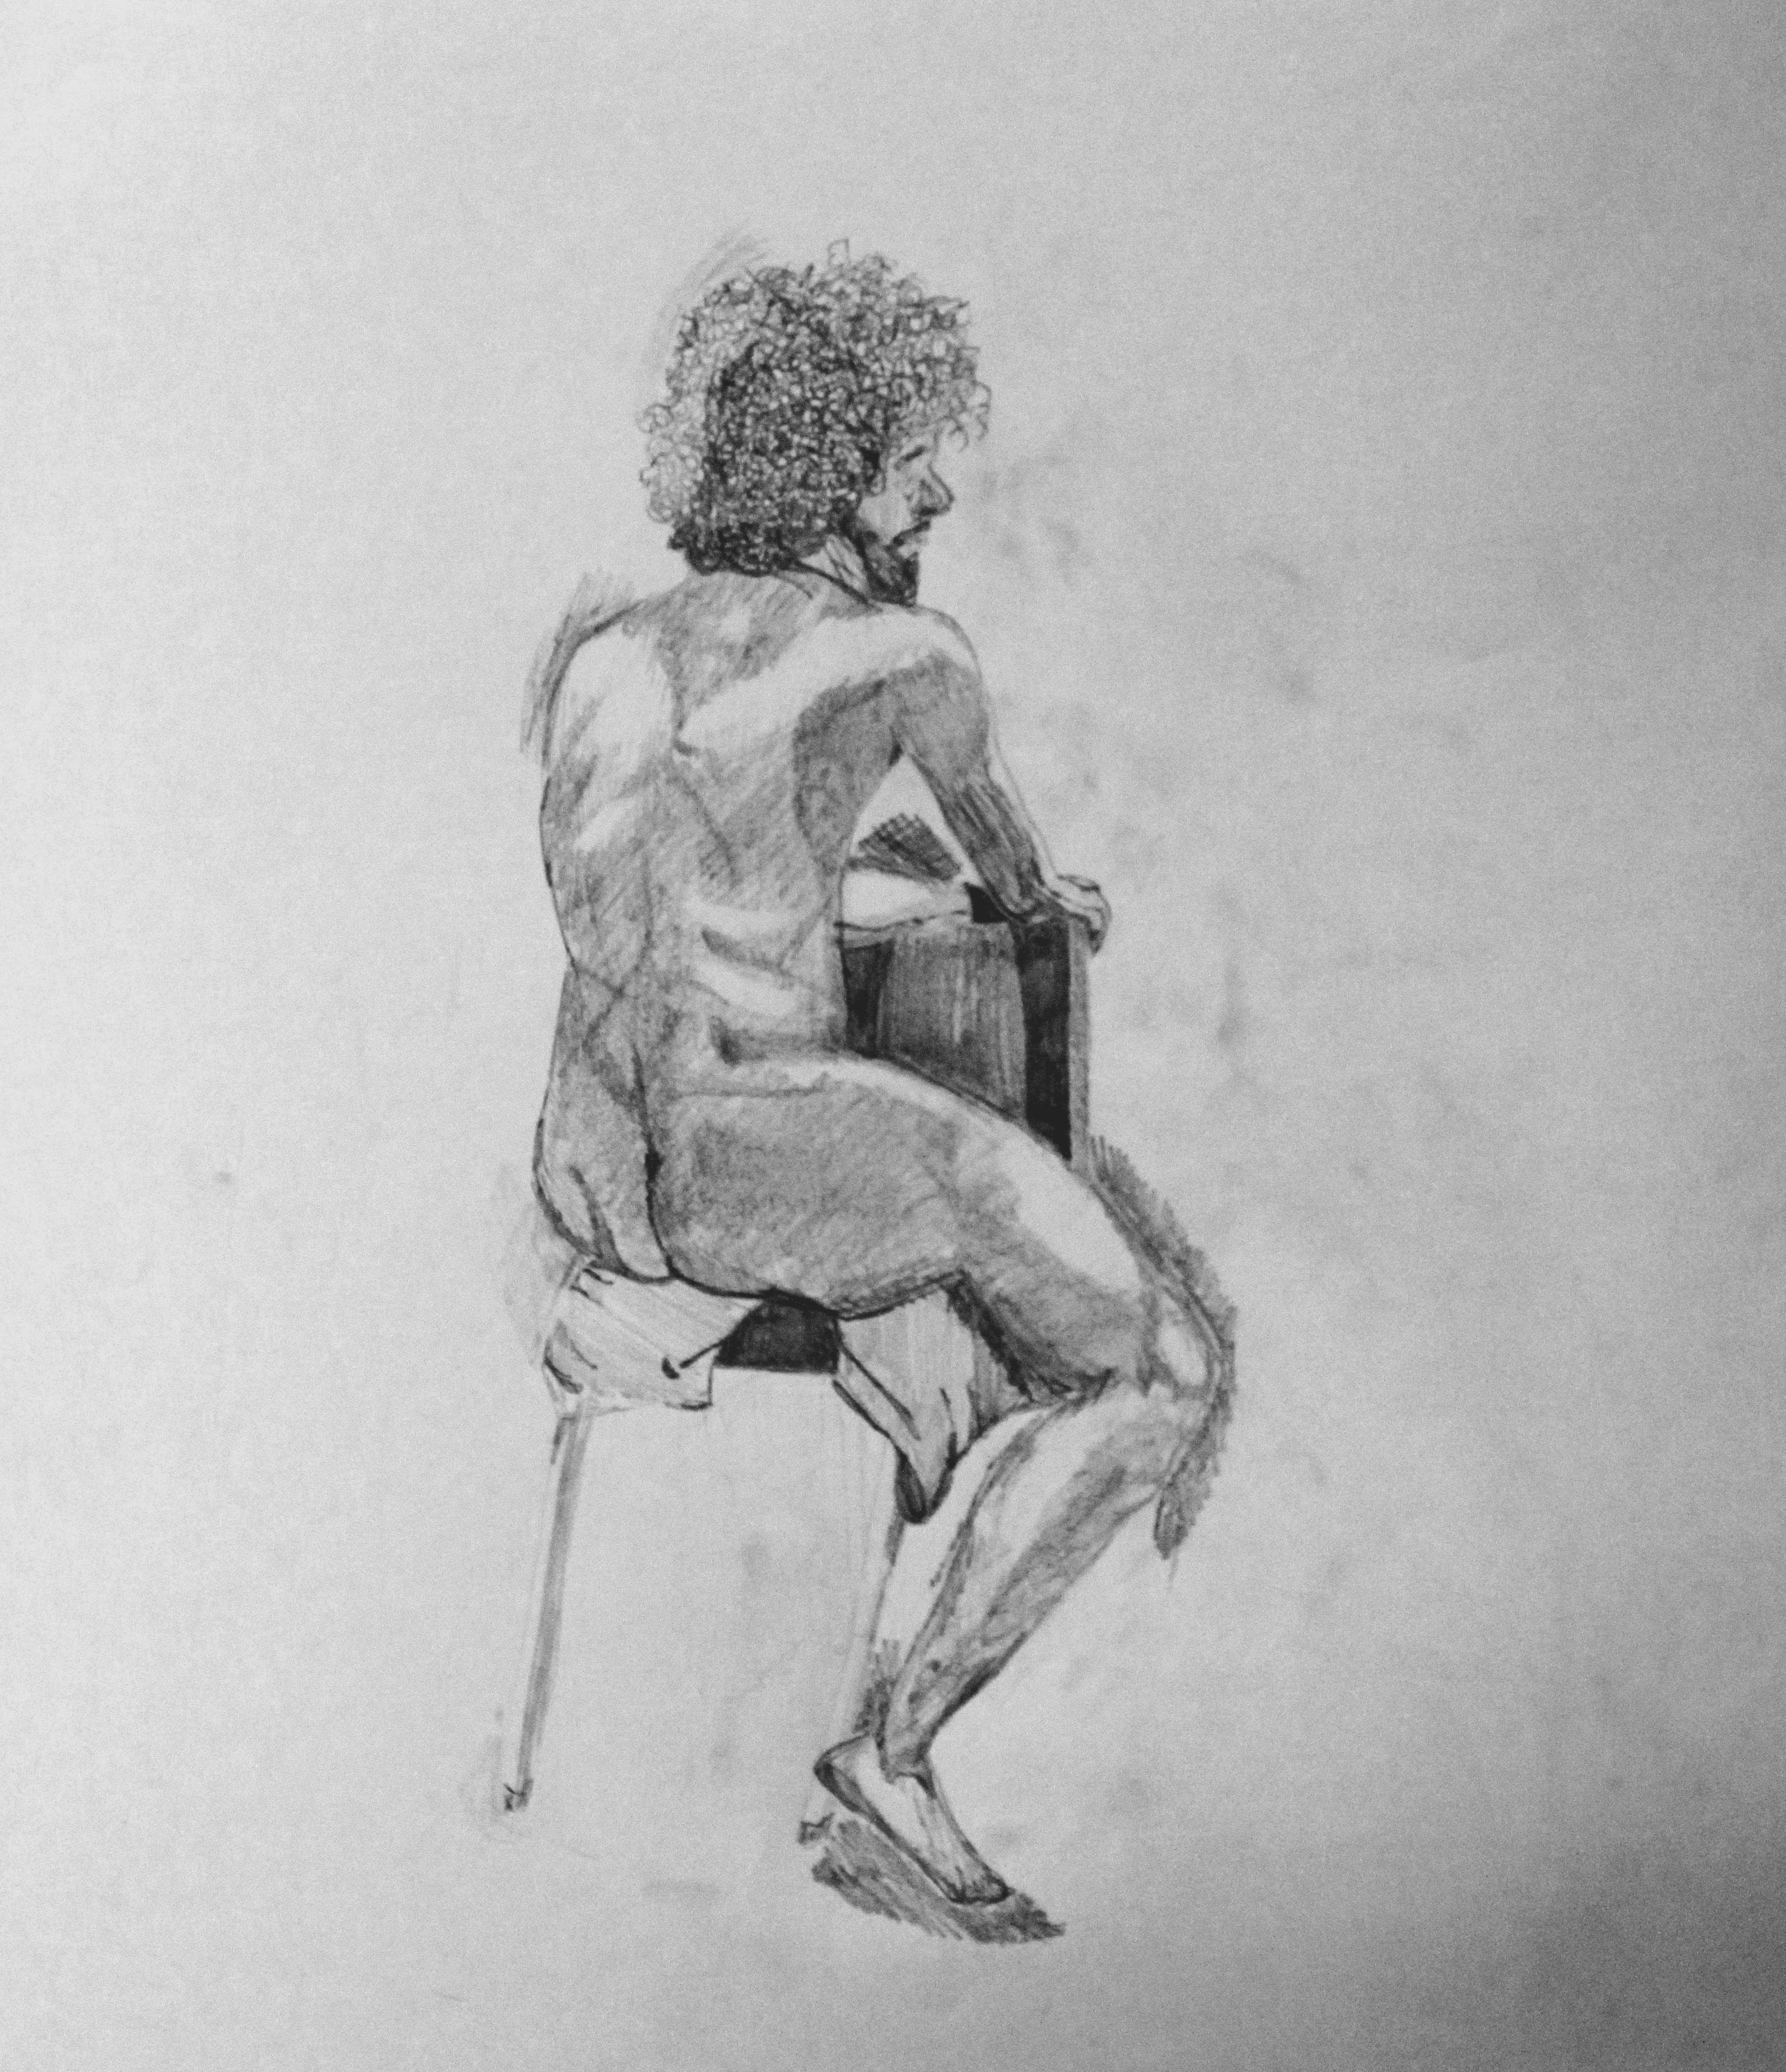 Value Studies with Model in Class-long pose